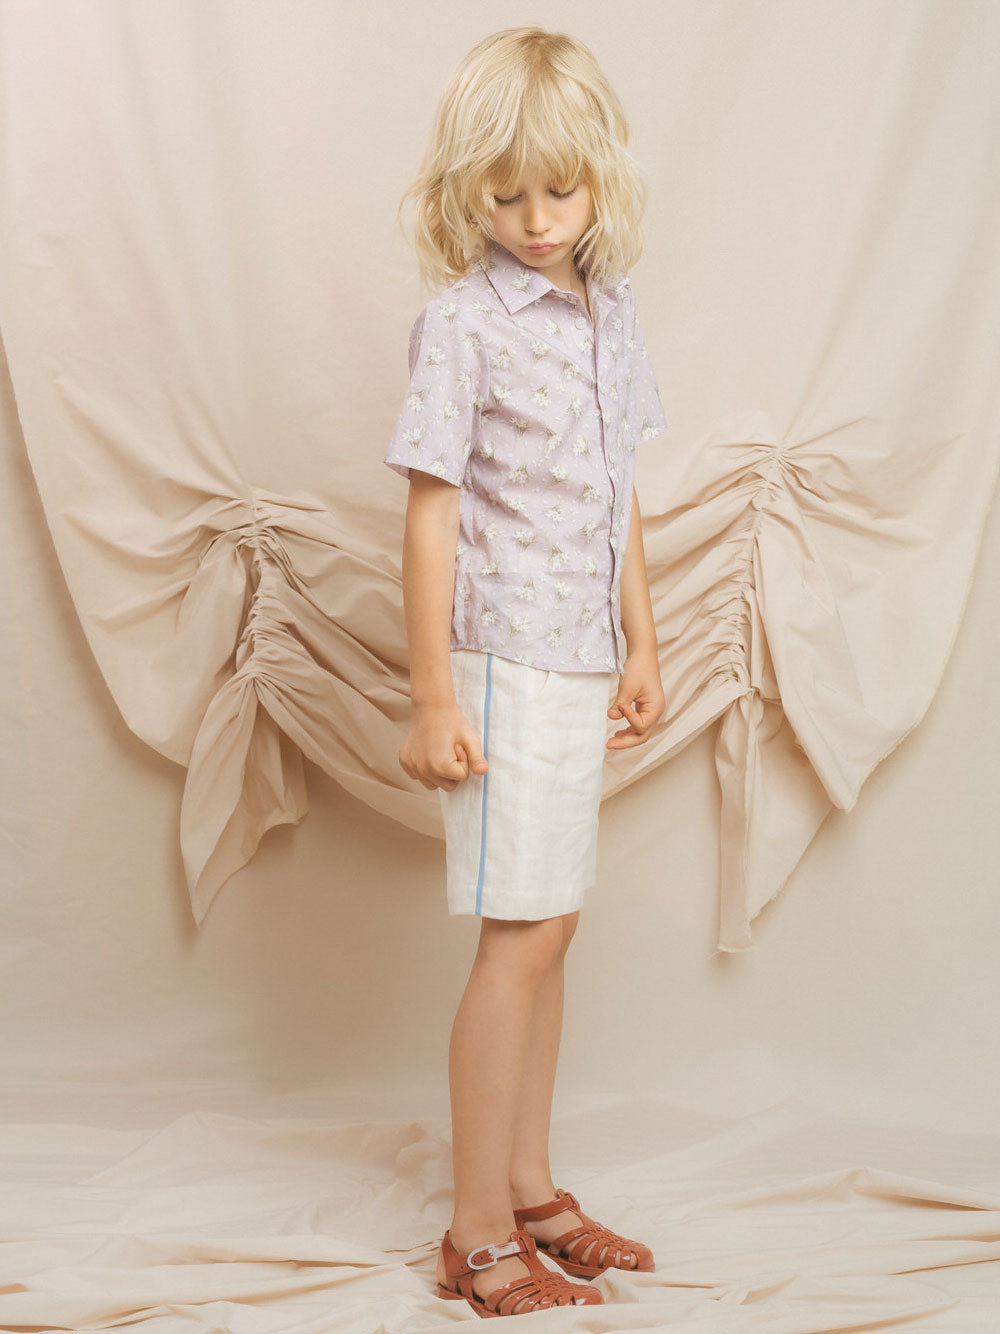 3 Years Sale - Shan and Toad - Luxury Kidswear Shop